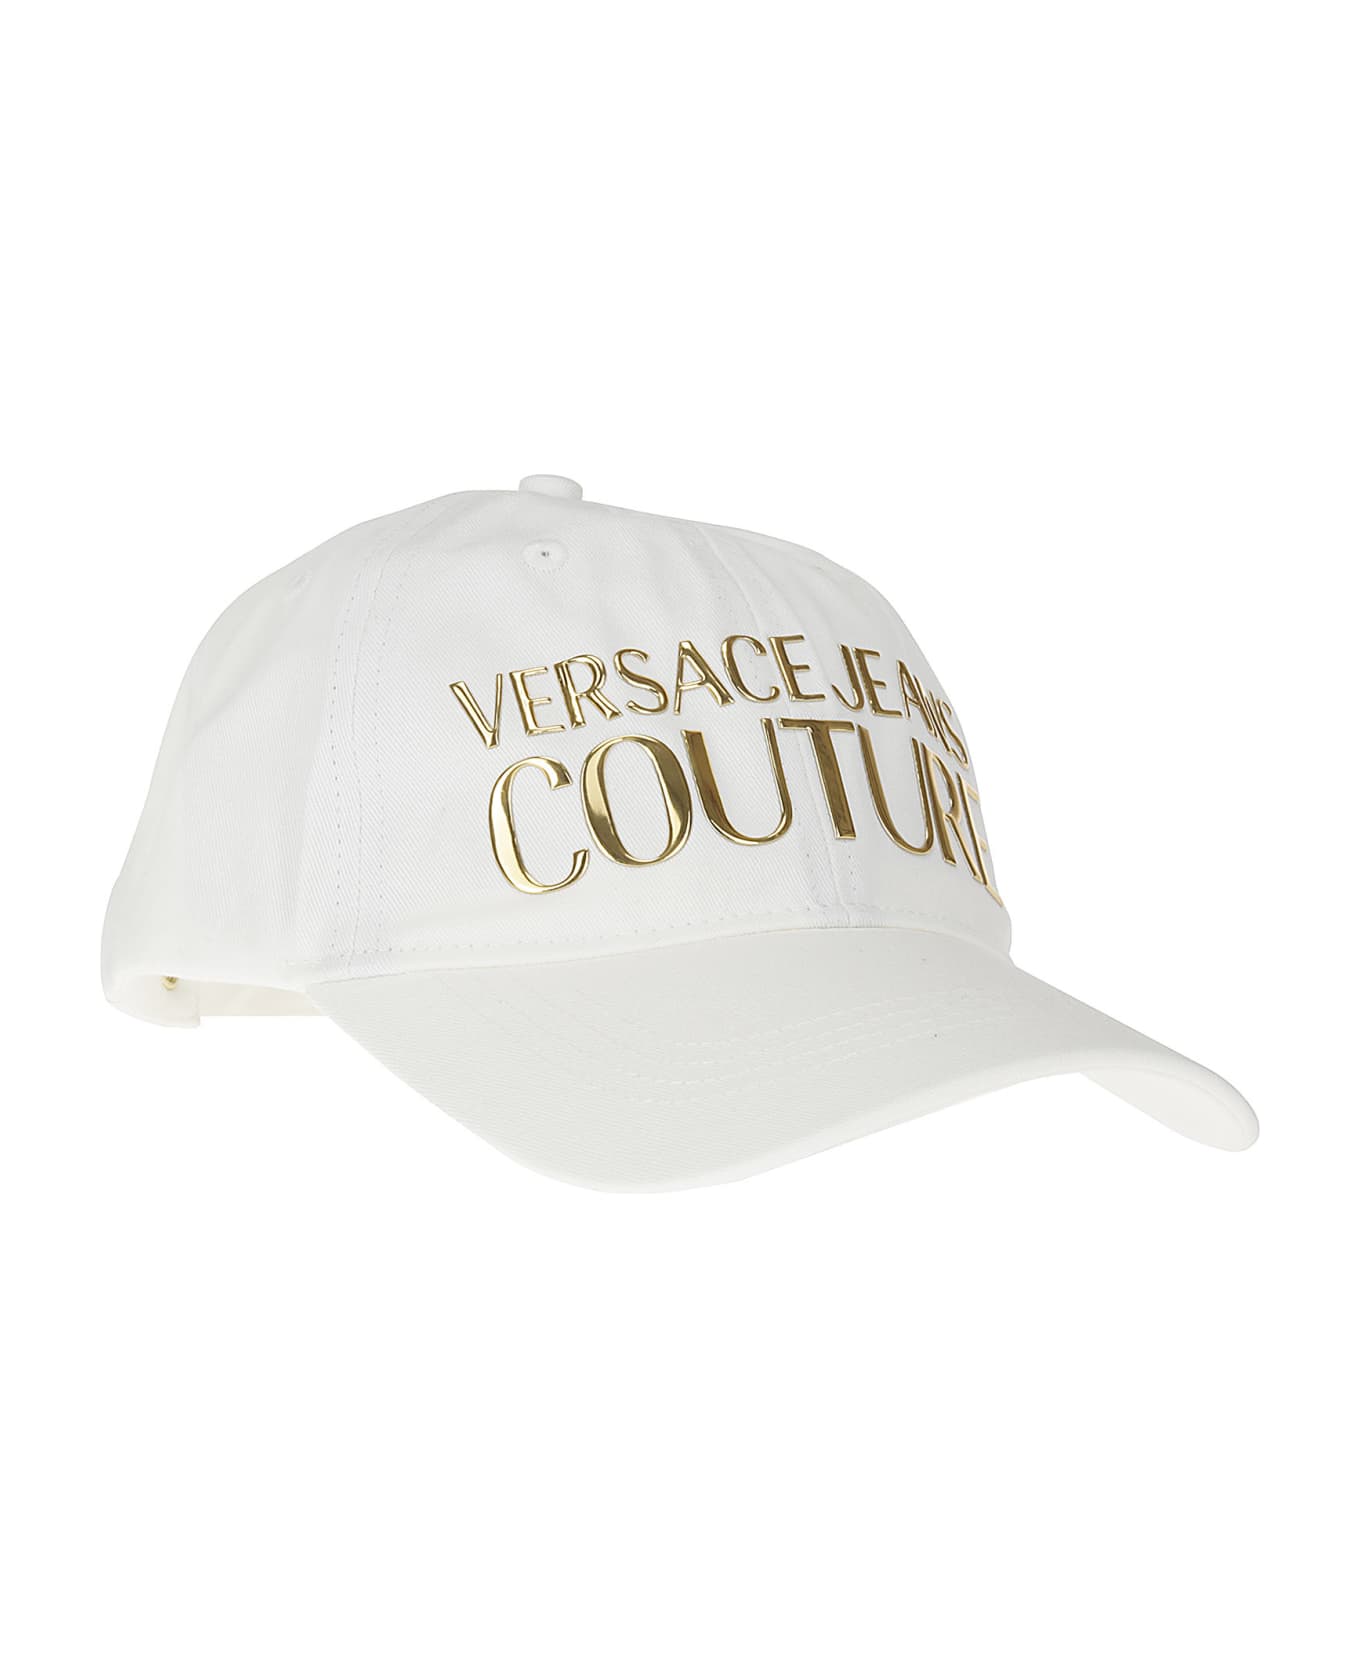 Versace Jeans Couture Baseball Cap With Cut In The Middle Hat - WHITE/GOLD